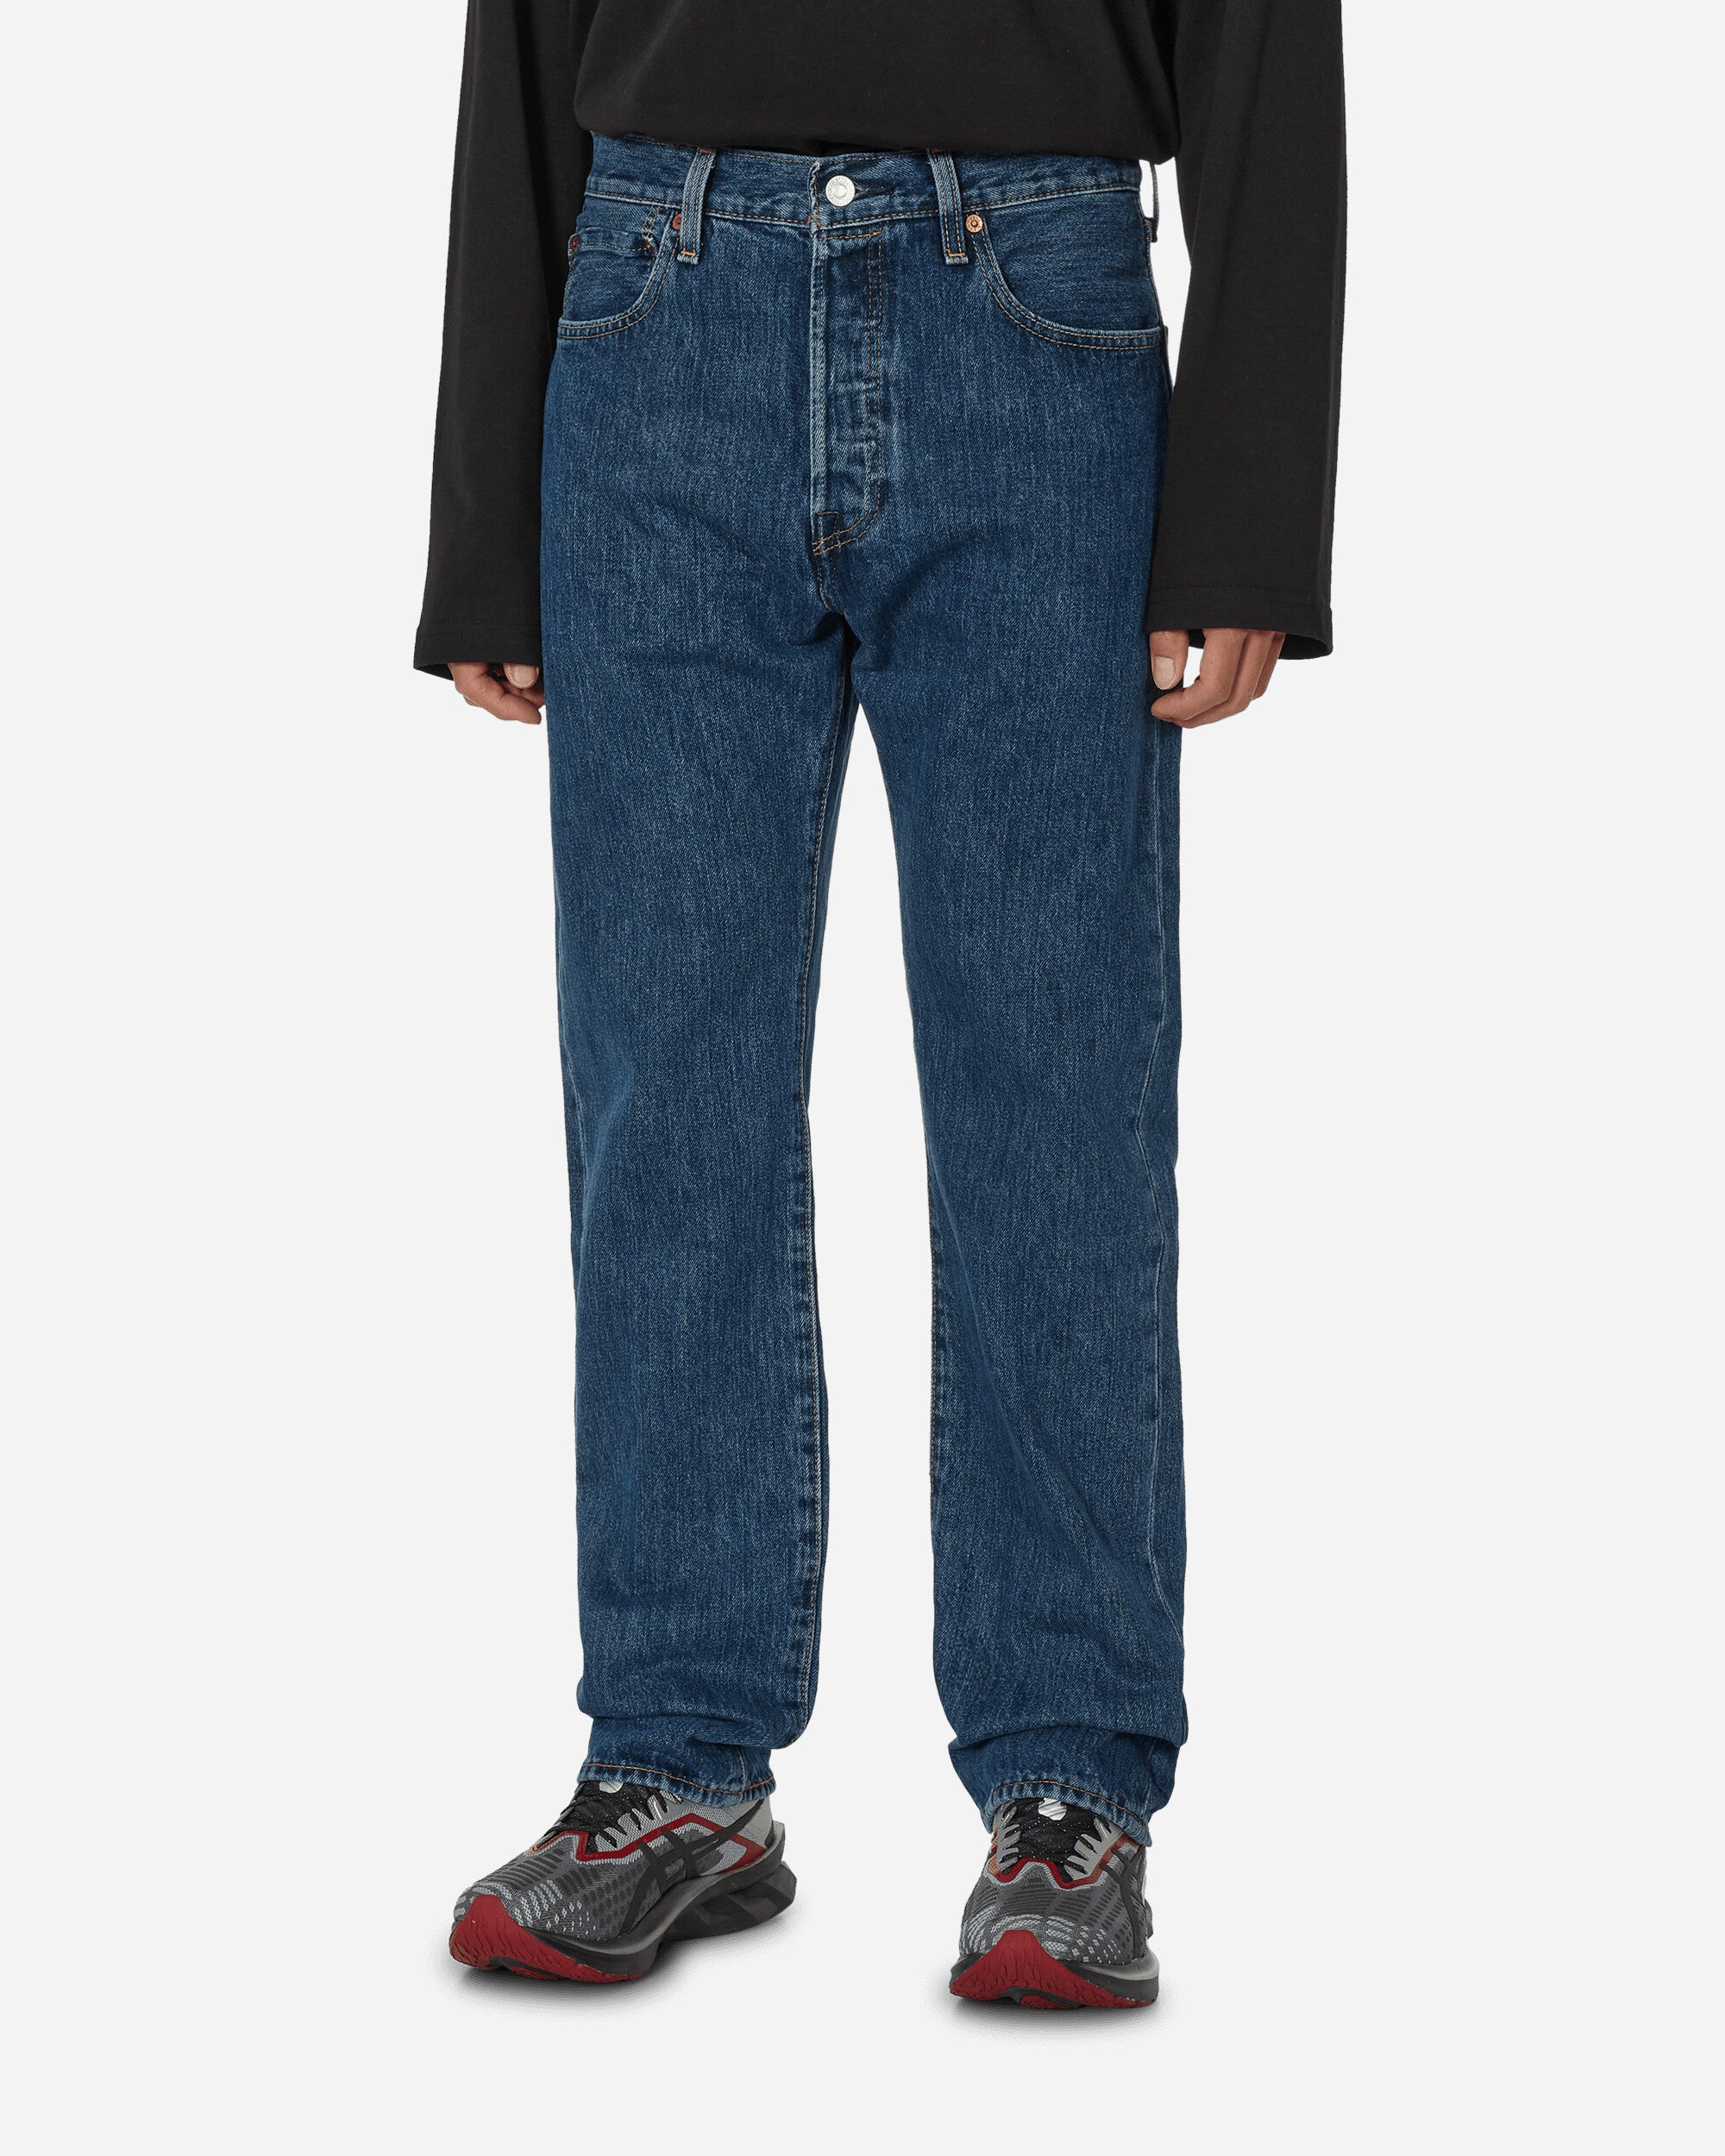 Levi's Slam Jam 501® 150th Anniversary Jeans Stone Washed